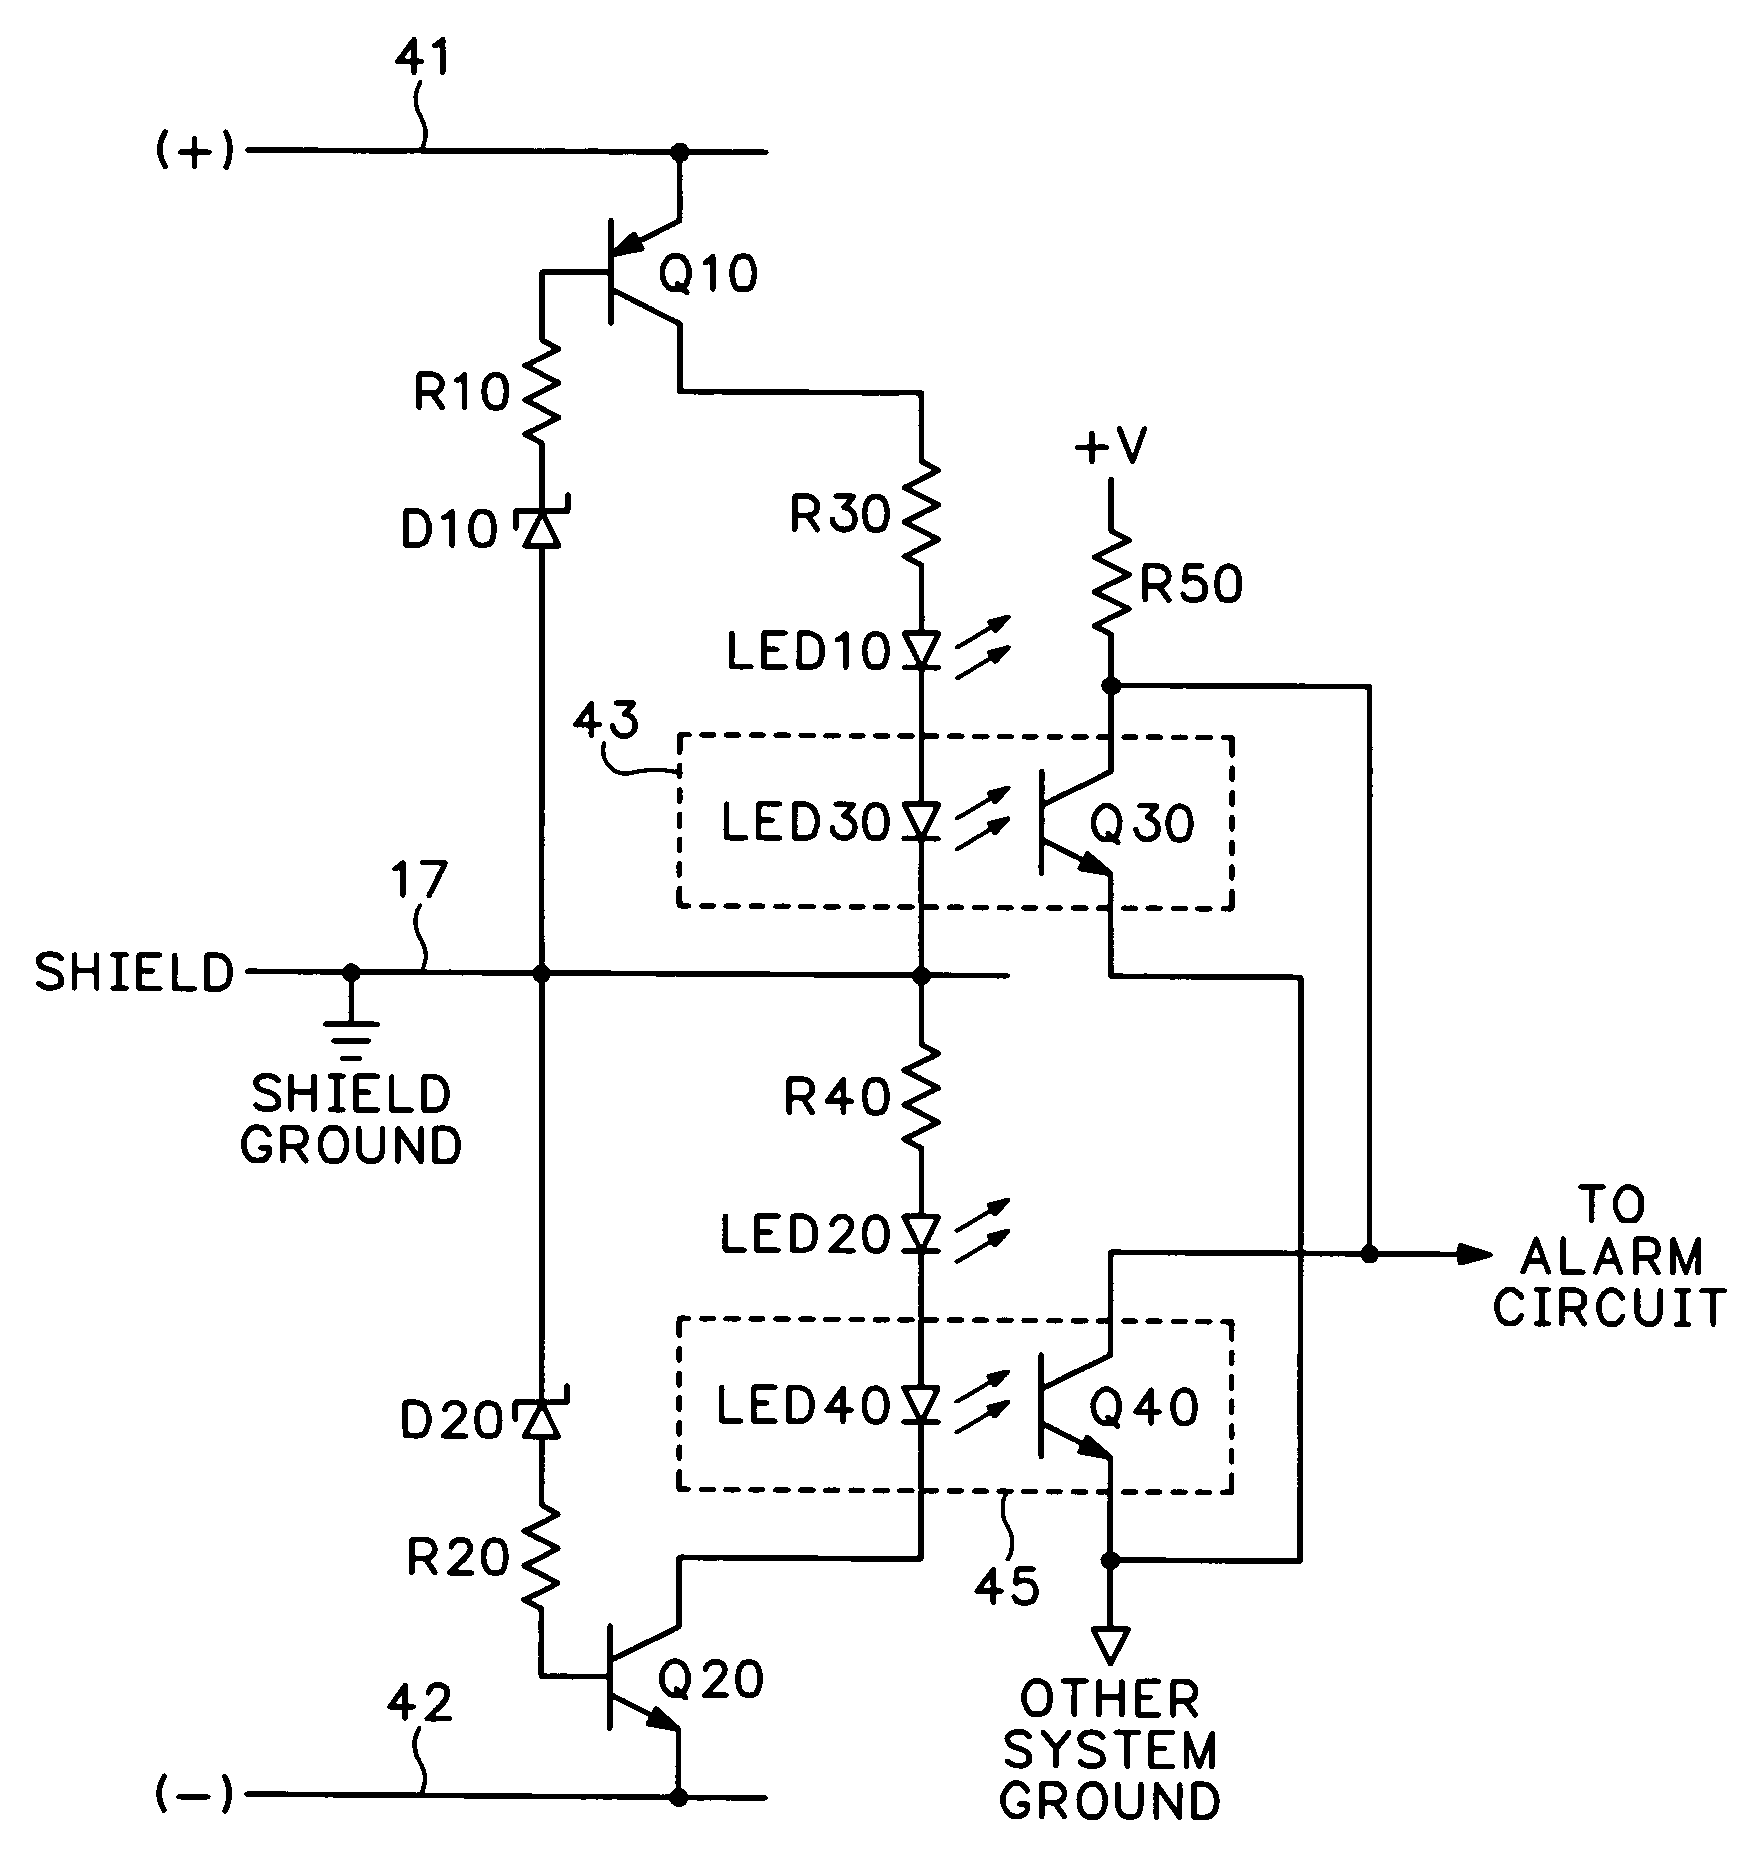 Short circuit detector for shield conductor in a fieldbus network